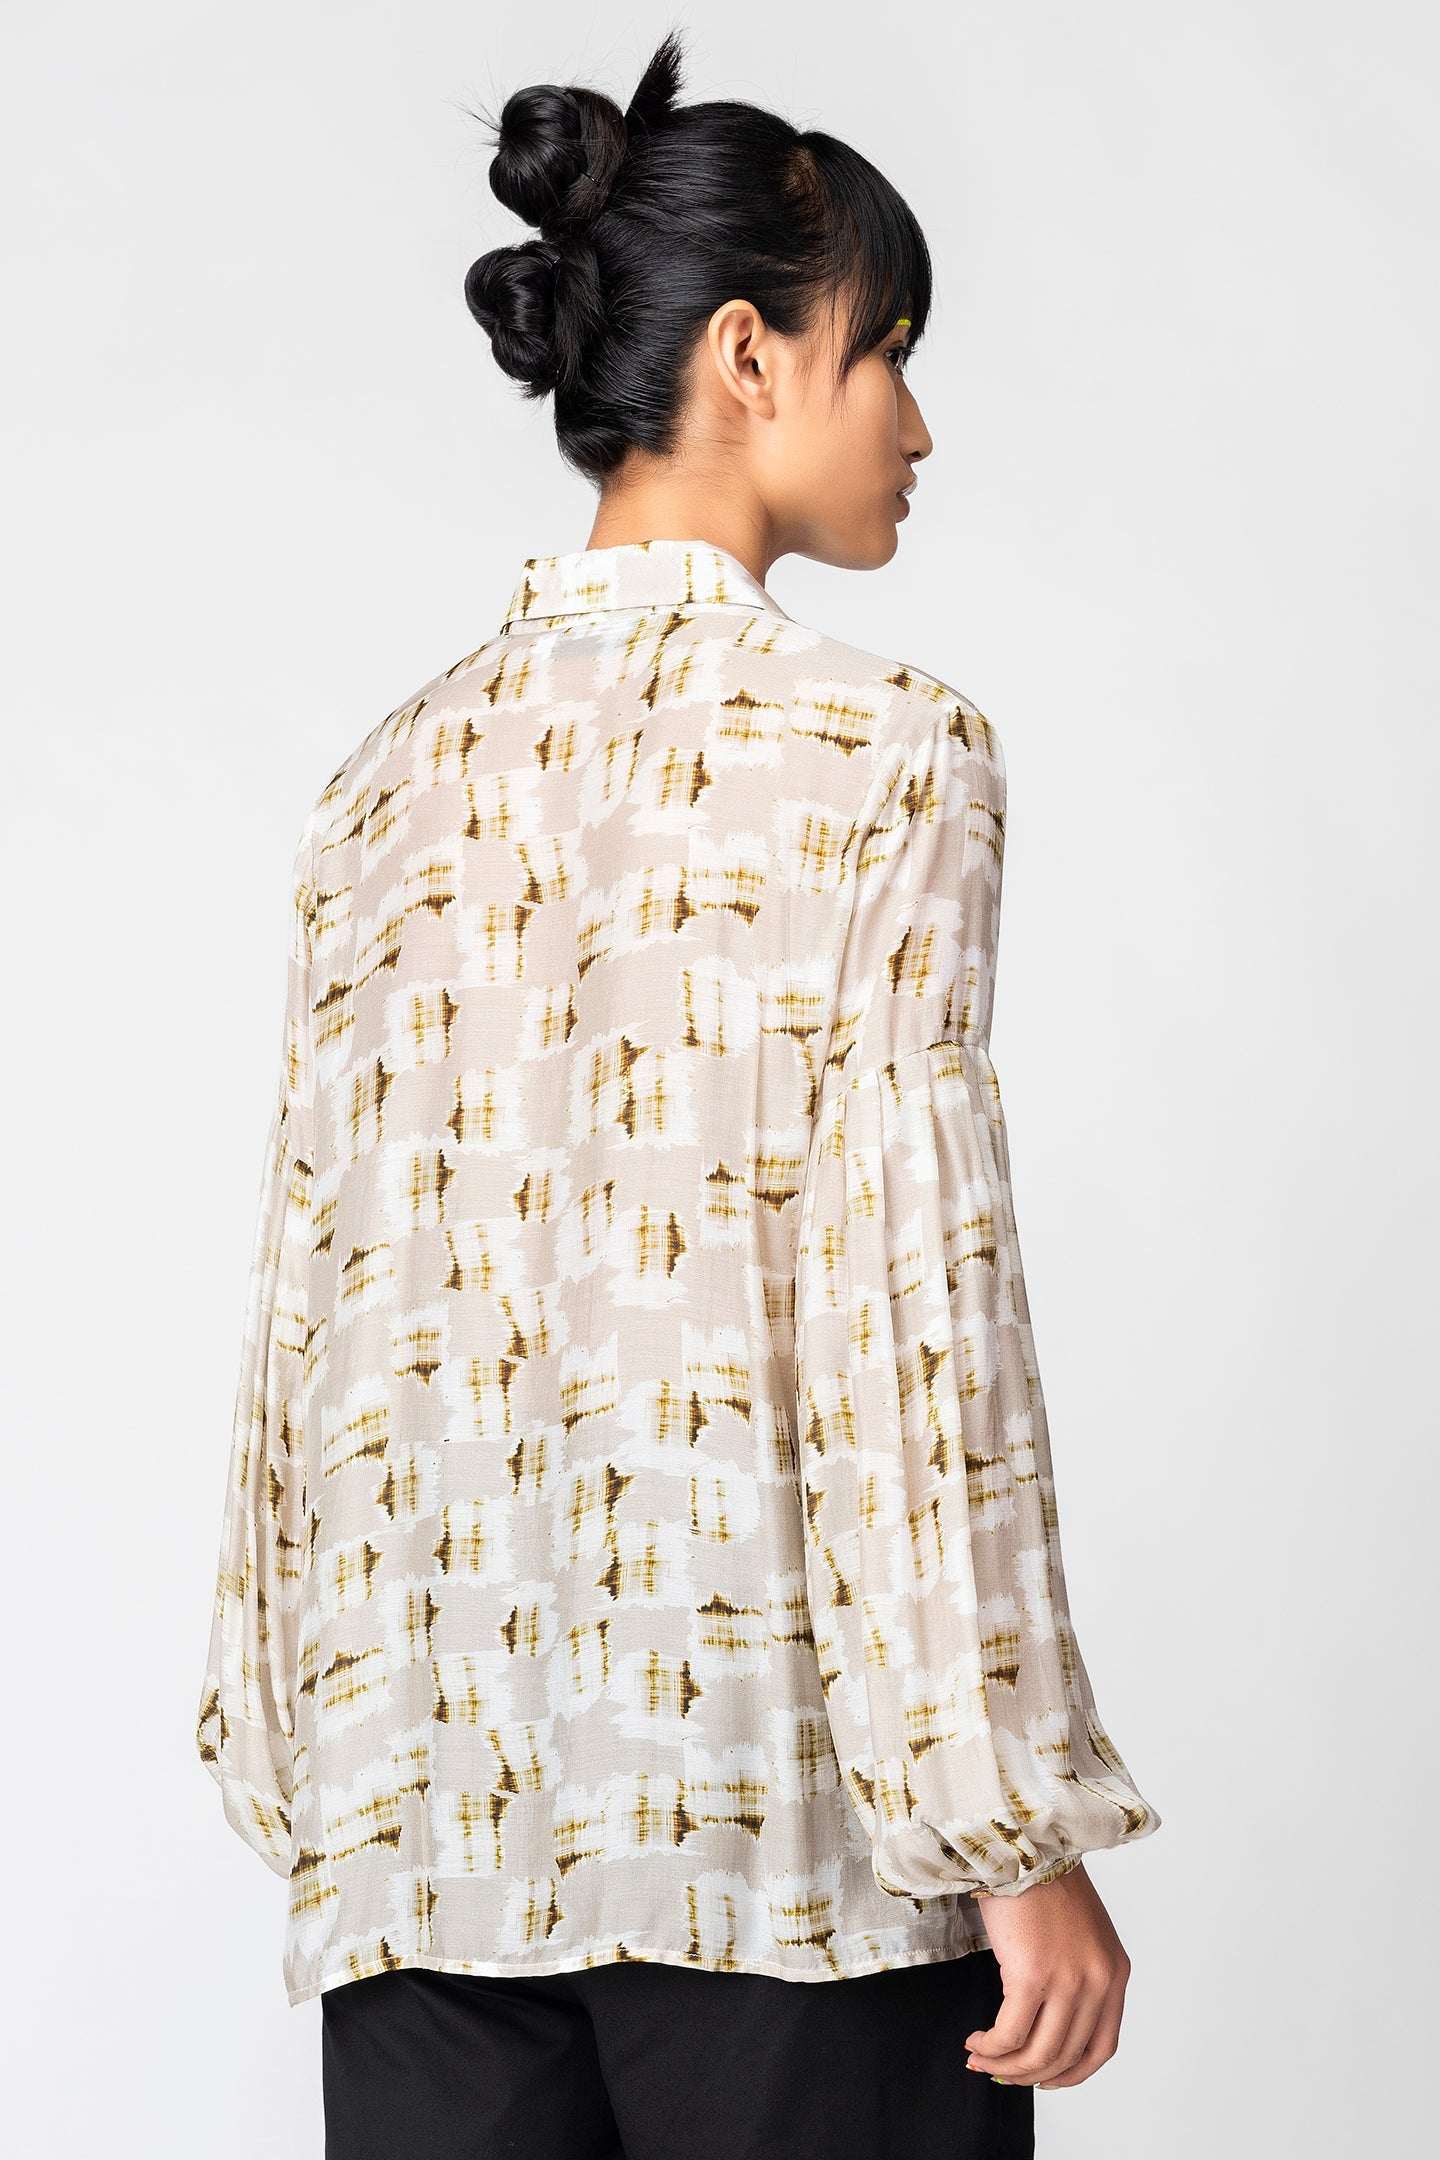 puff-sleeved-graphic-printed-shirt - Genes online store 2020